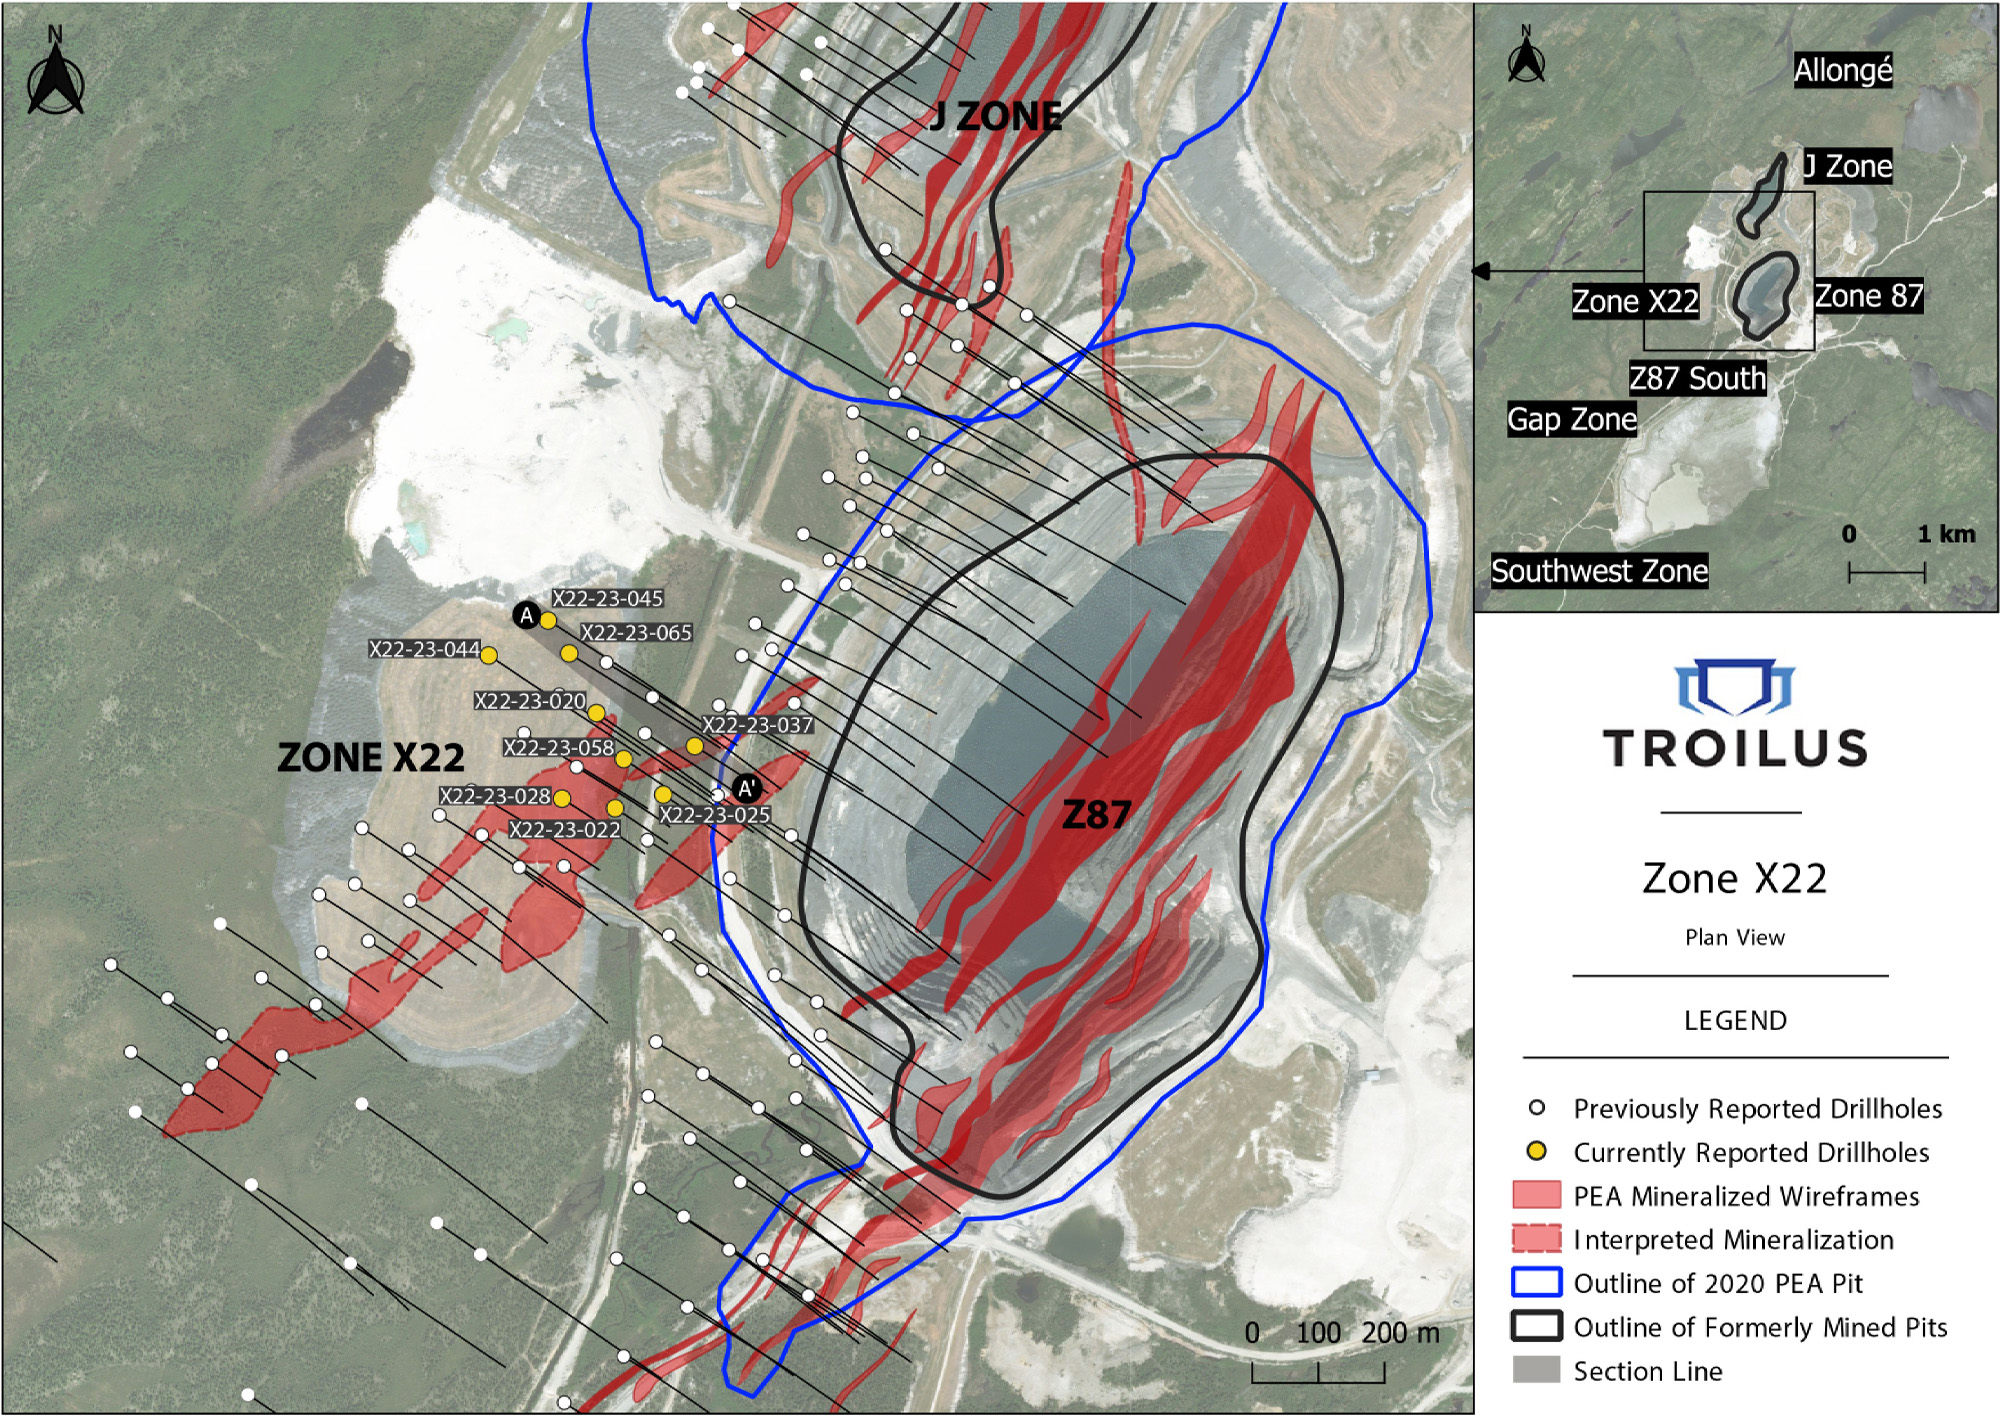 Plan View Map of the Zone X22 Showing Current and Previously Reported Drilling